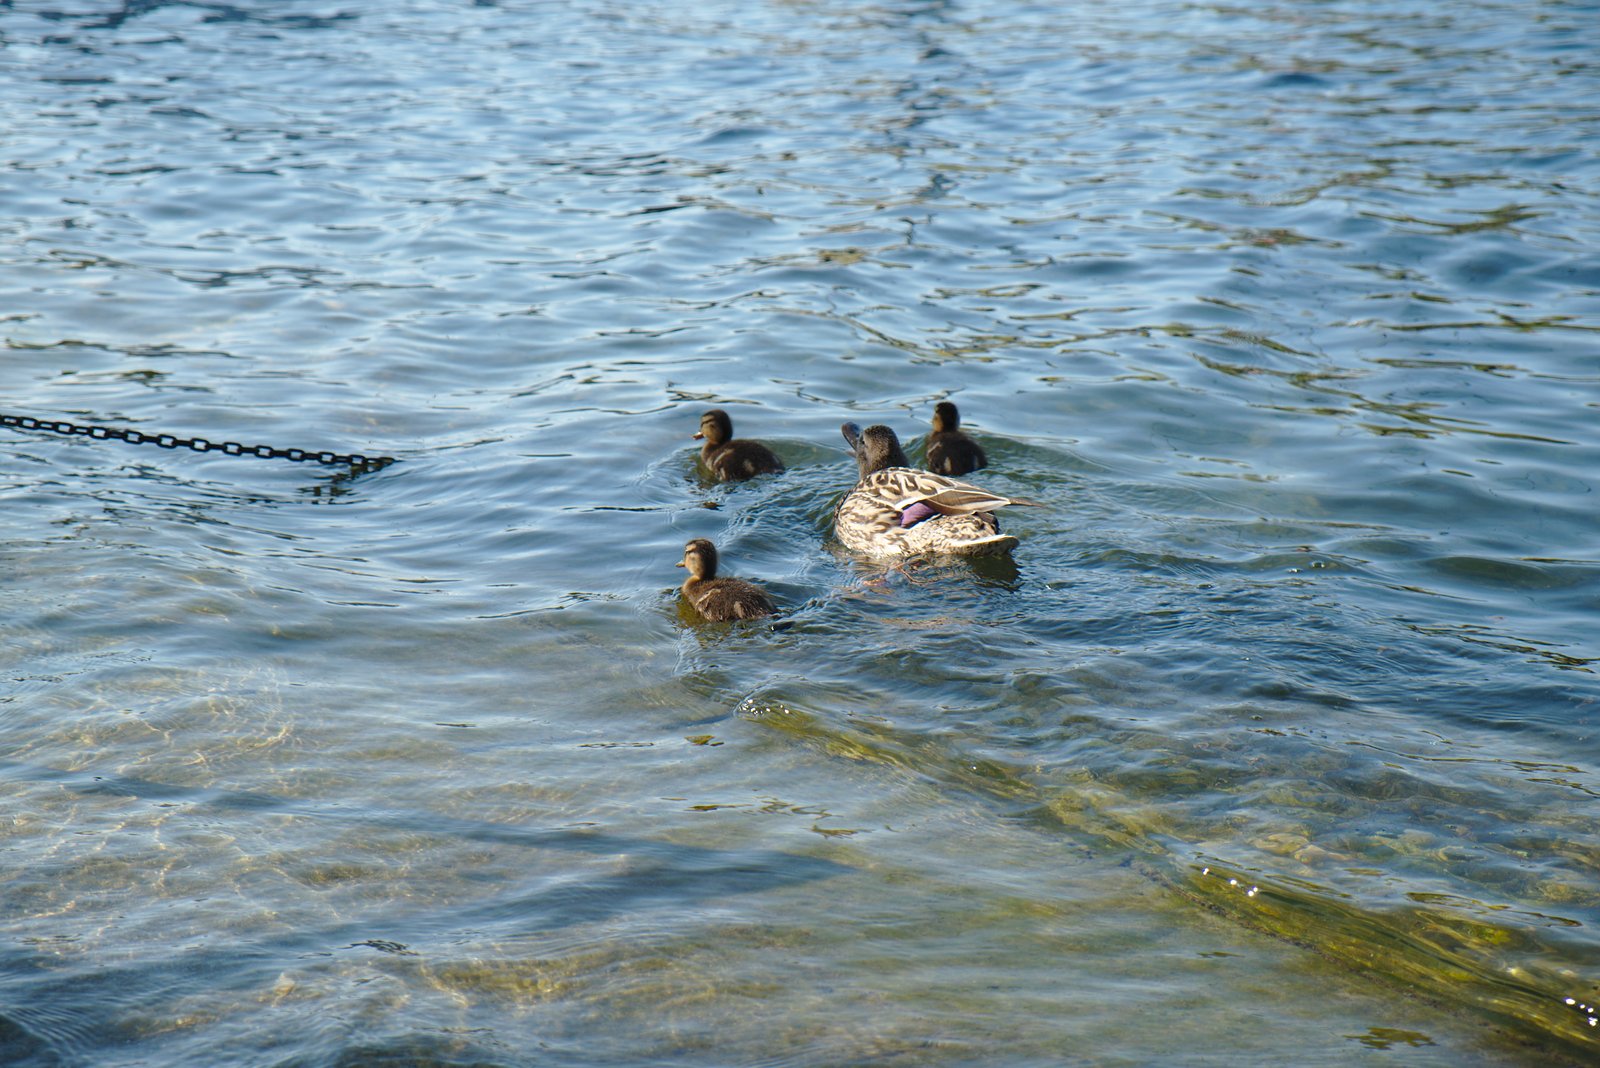 some ducks are in the water and a chain is hanging over them